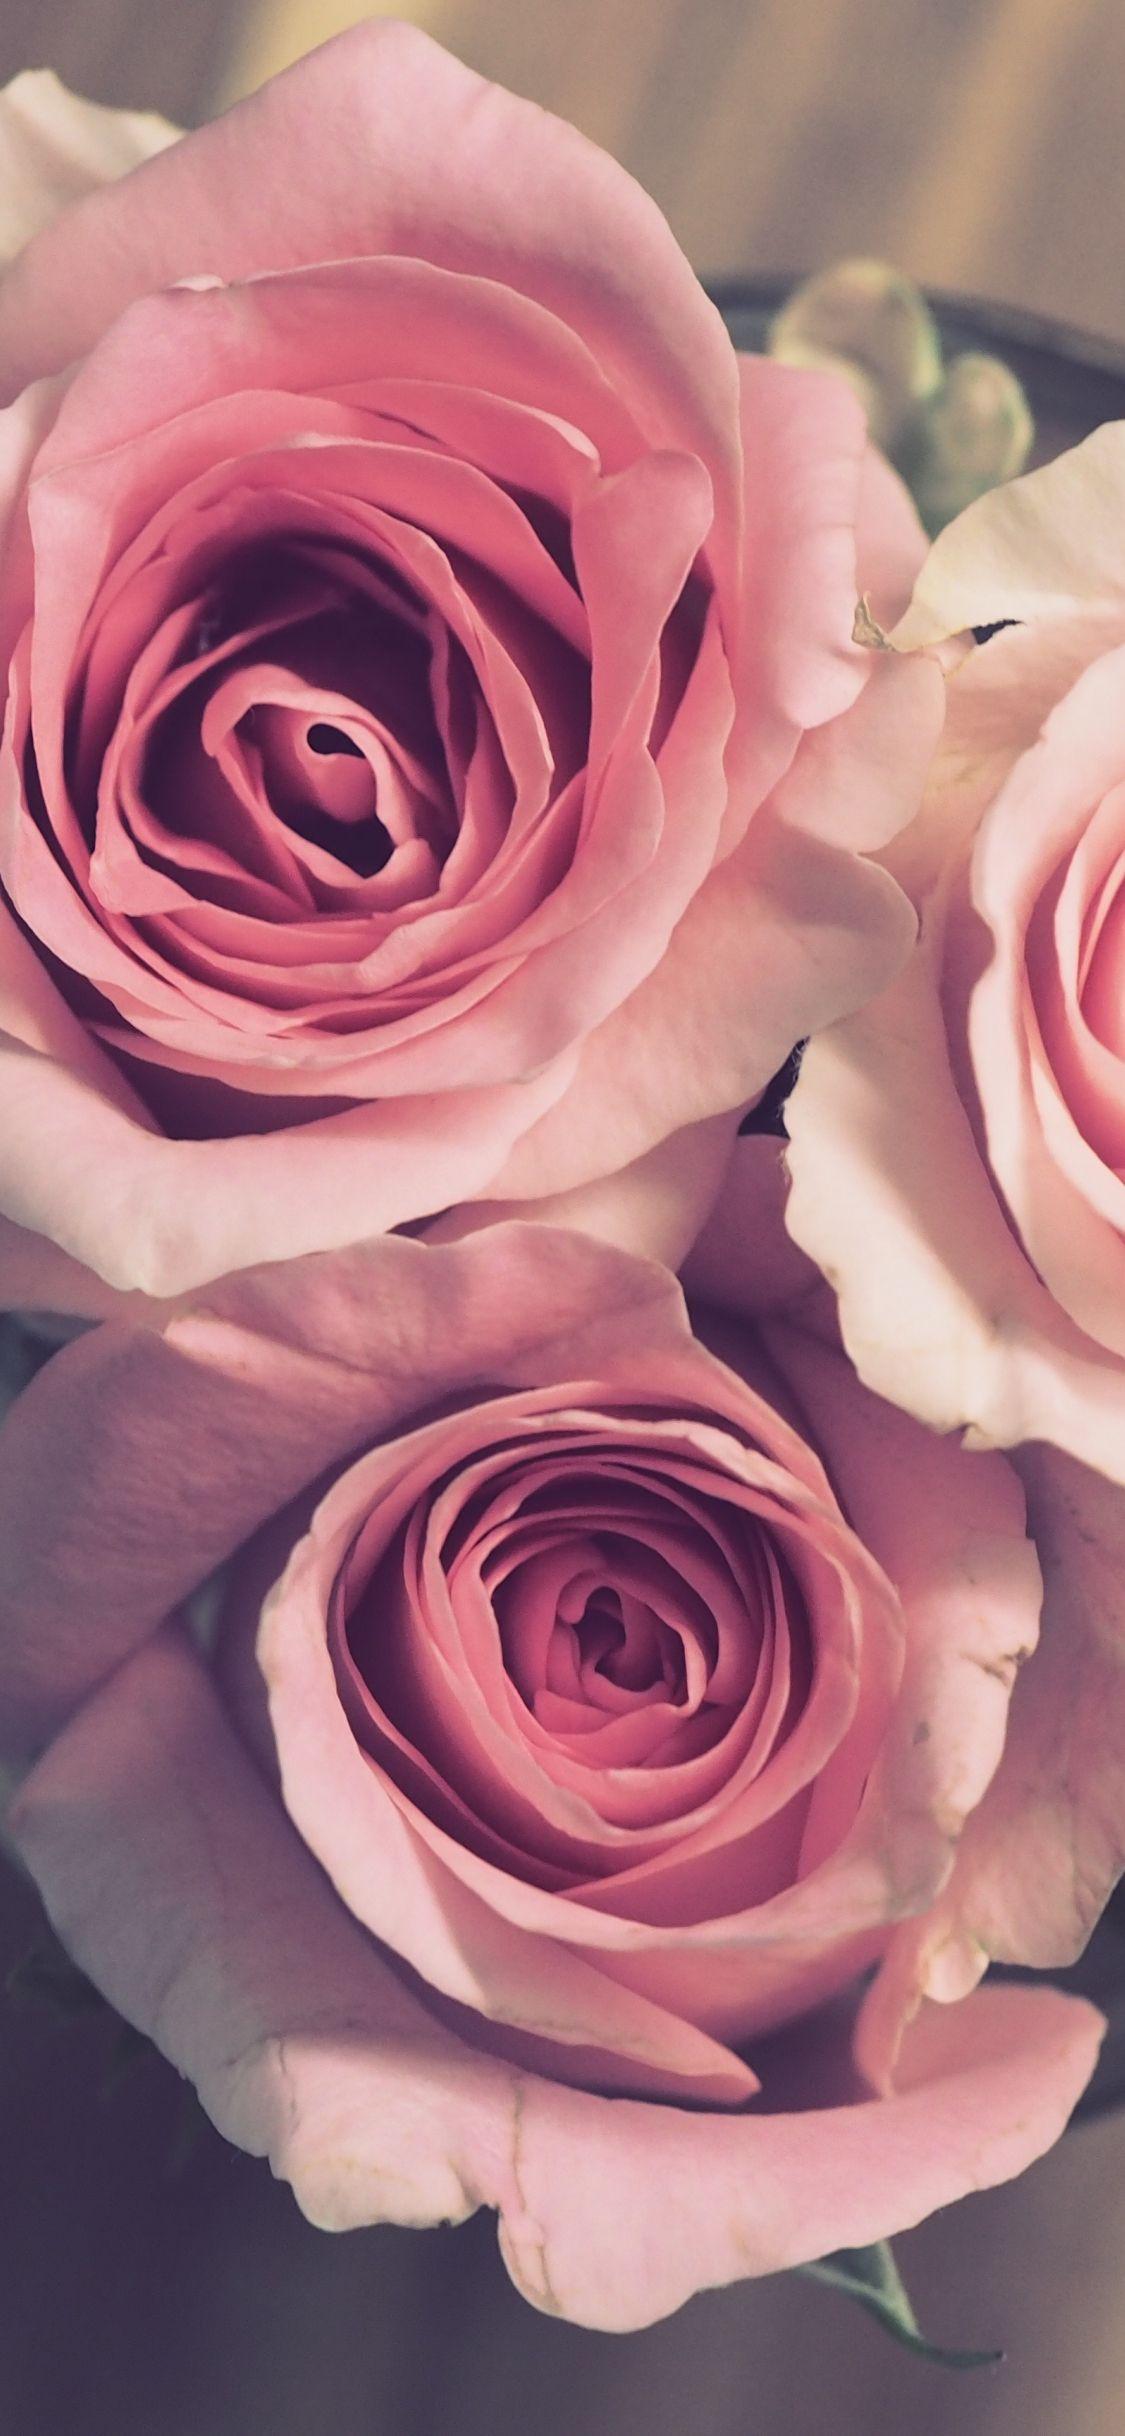 Pink Rose iPhone Wallpapers - Top Free Pink Rose iPhone Backgrounds ...